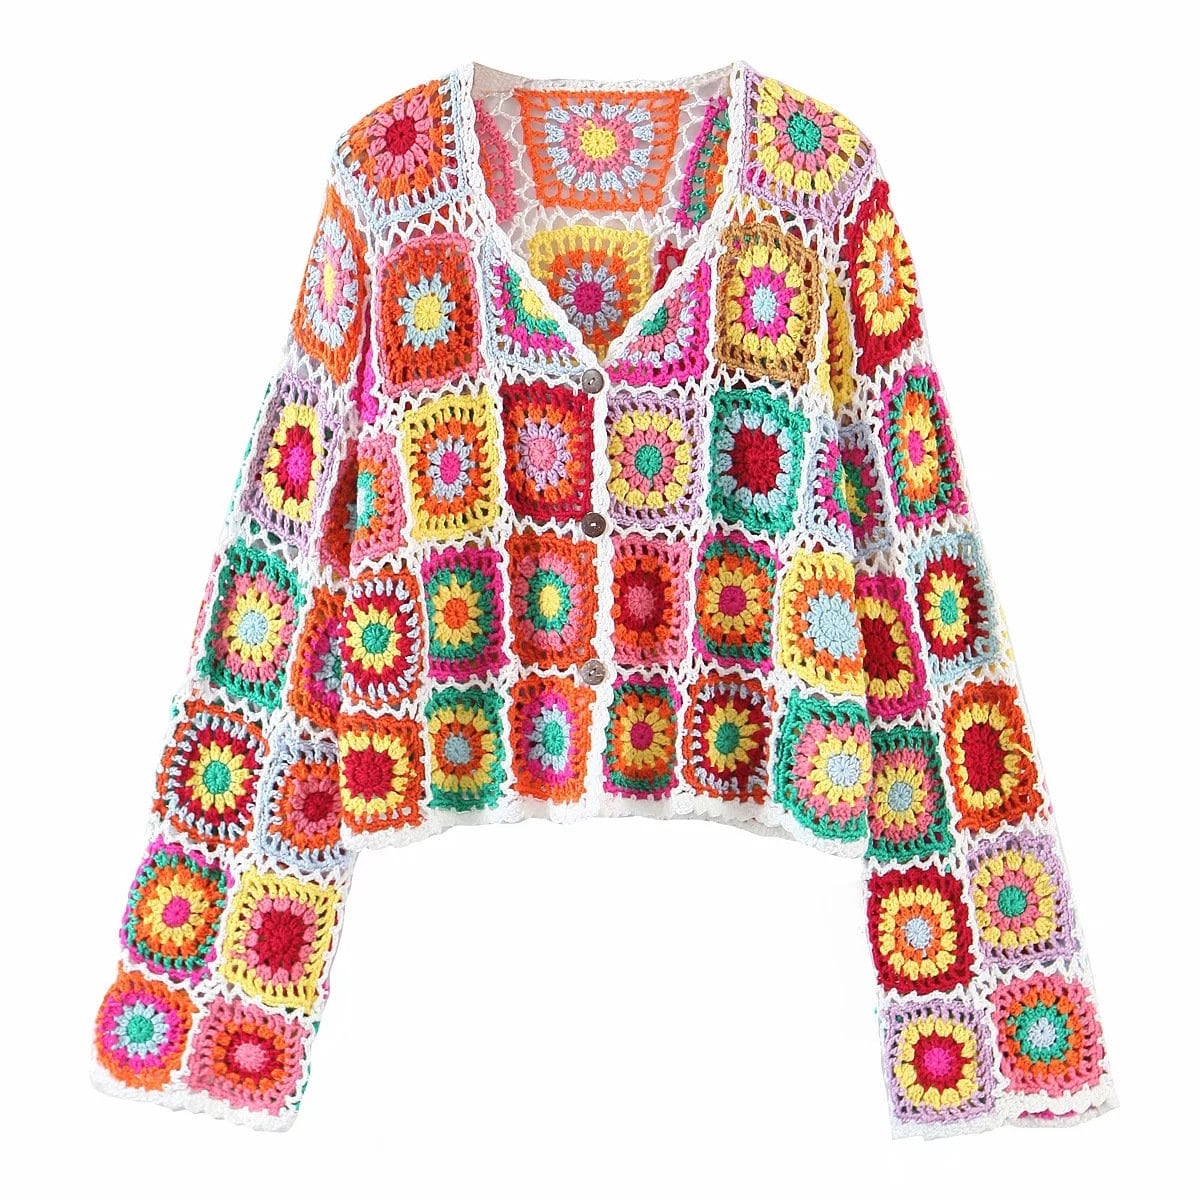 Thanks for the great review Lori W. ★★★★★! etsy.me/3OK9lvJ #etsy #rainbow #handmadesweater #knittedsweater #patchworksweater #bohostyle #colorfulcardigan #festivalgifts #happieholiday #mothersdaygift